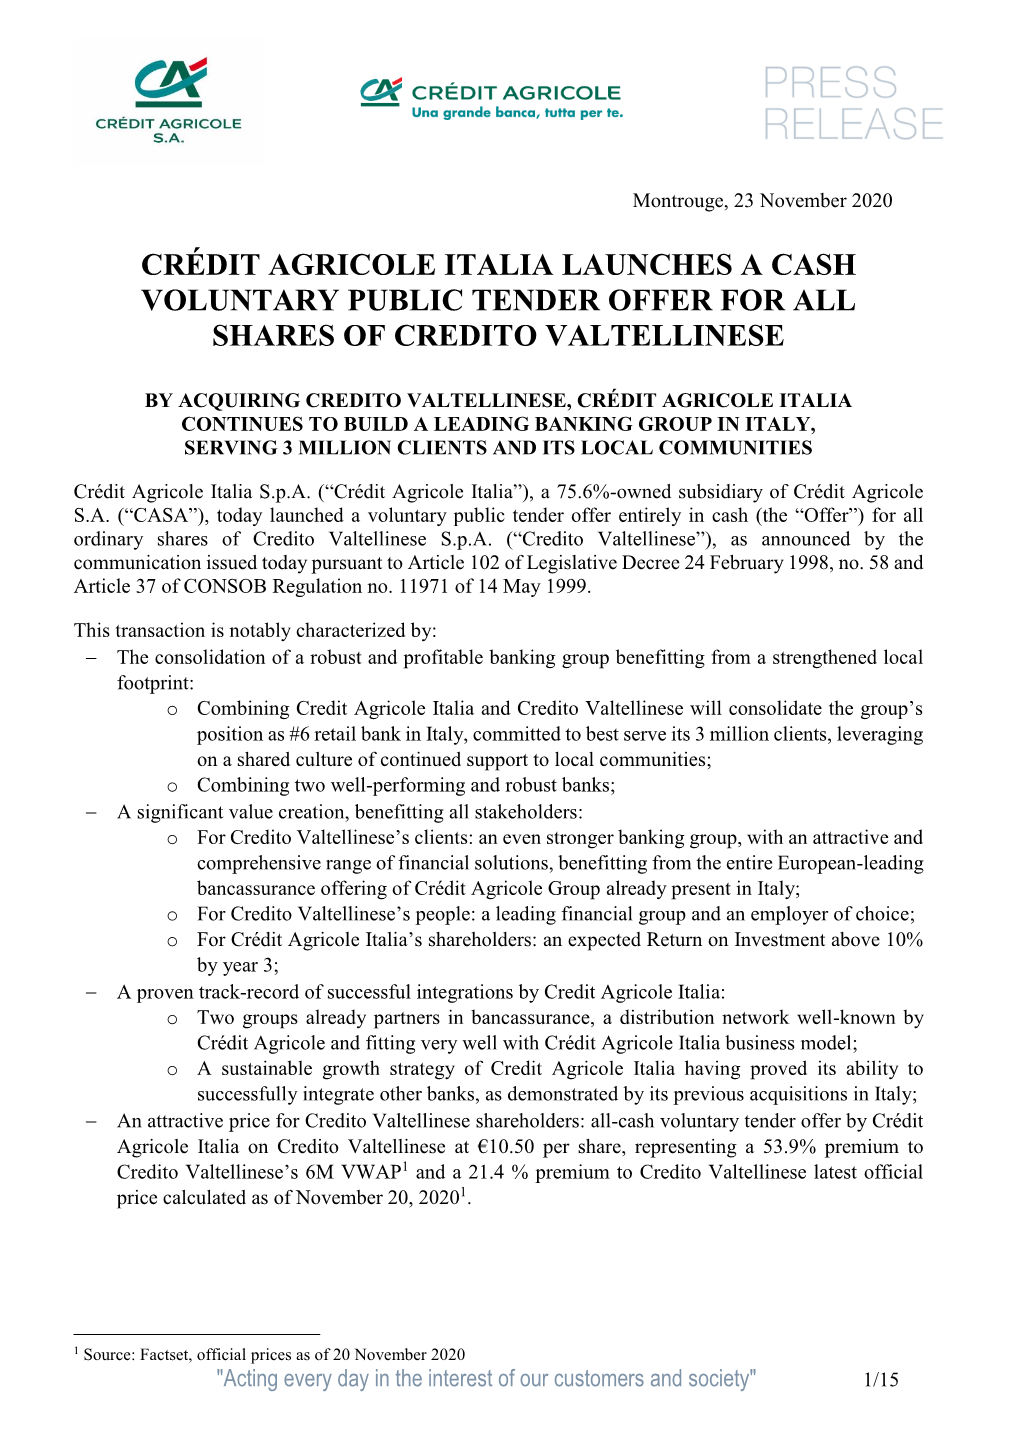 Crédit Agricole Italia Launches a Cash Voluntary Public Tender Offer for All Shares of Credito Valtellinese